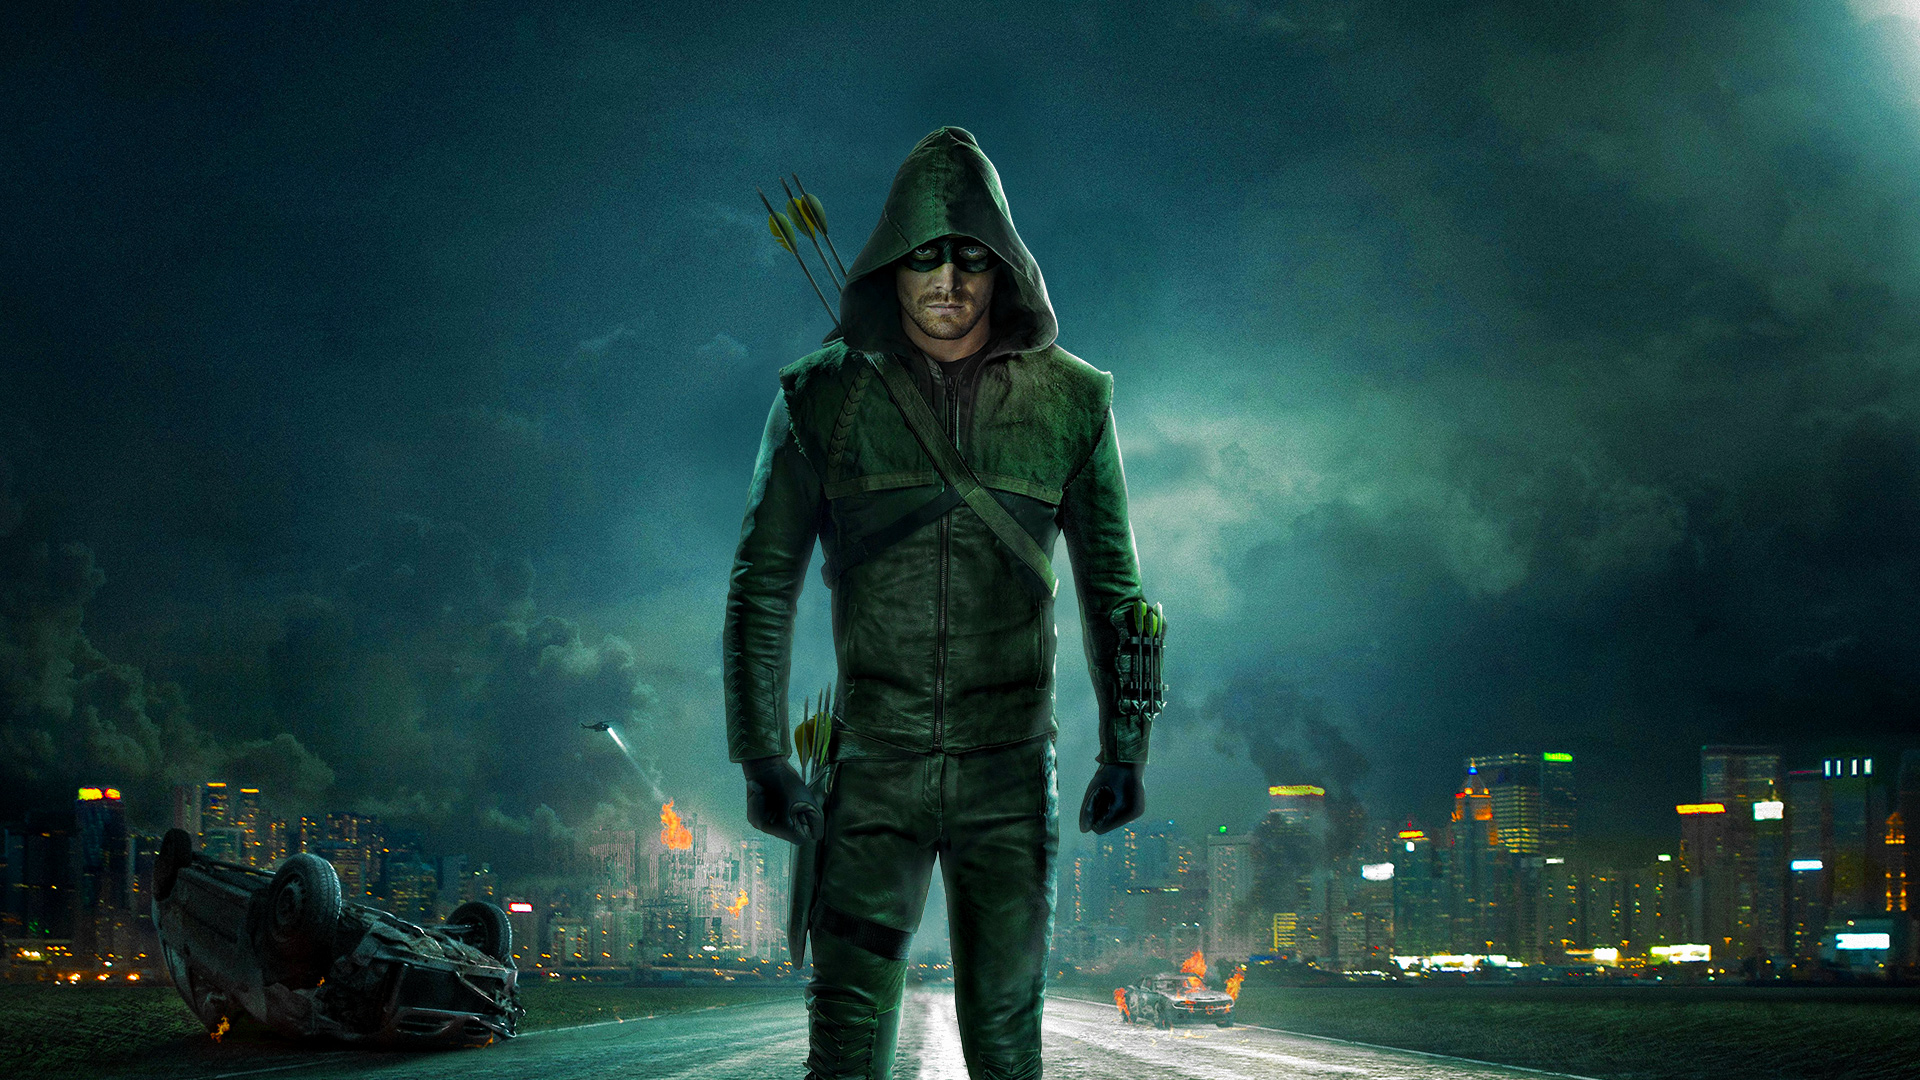 120+ Arrow HD Wallpapers and Backgrounds